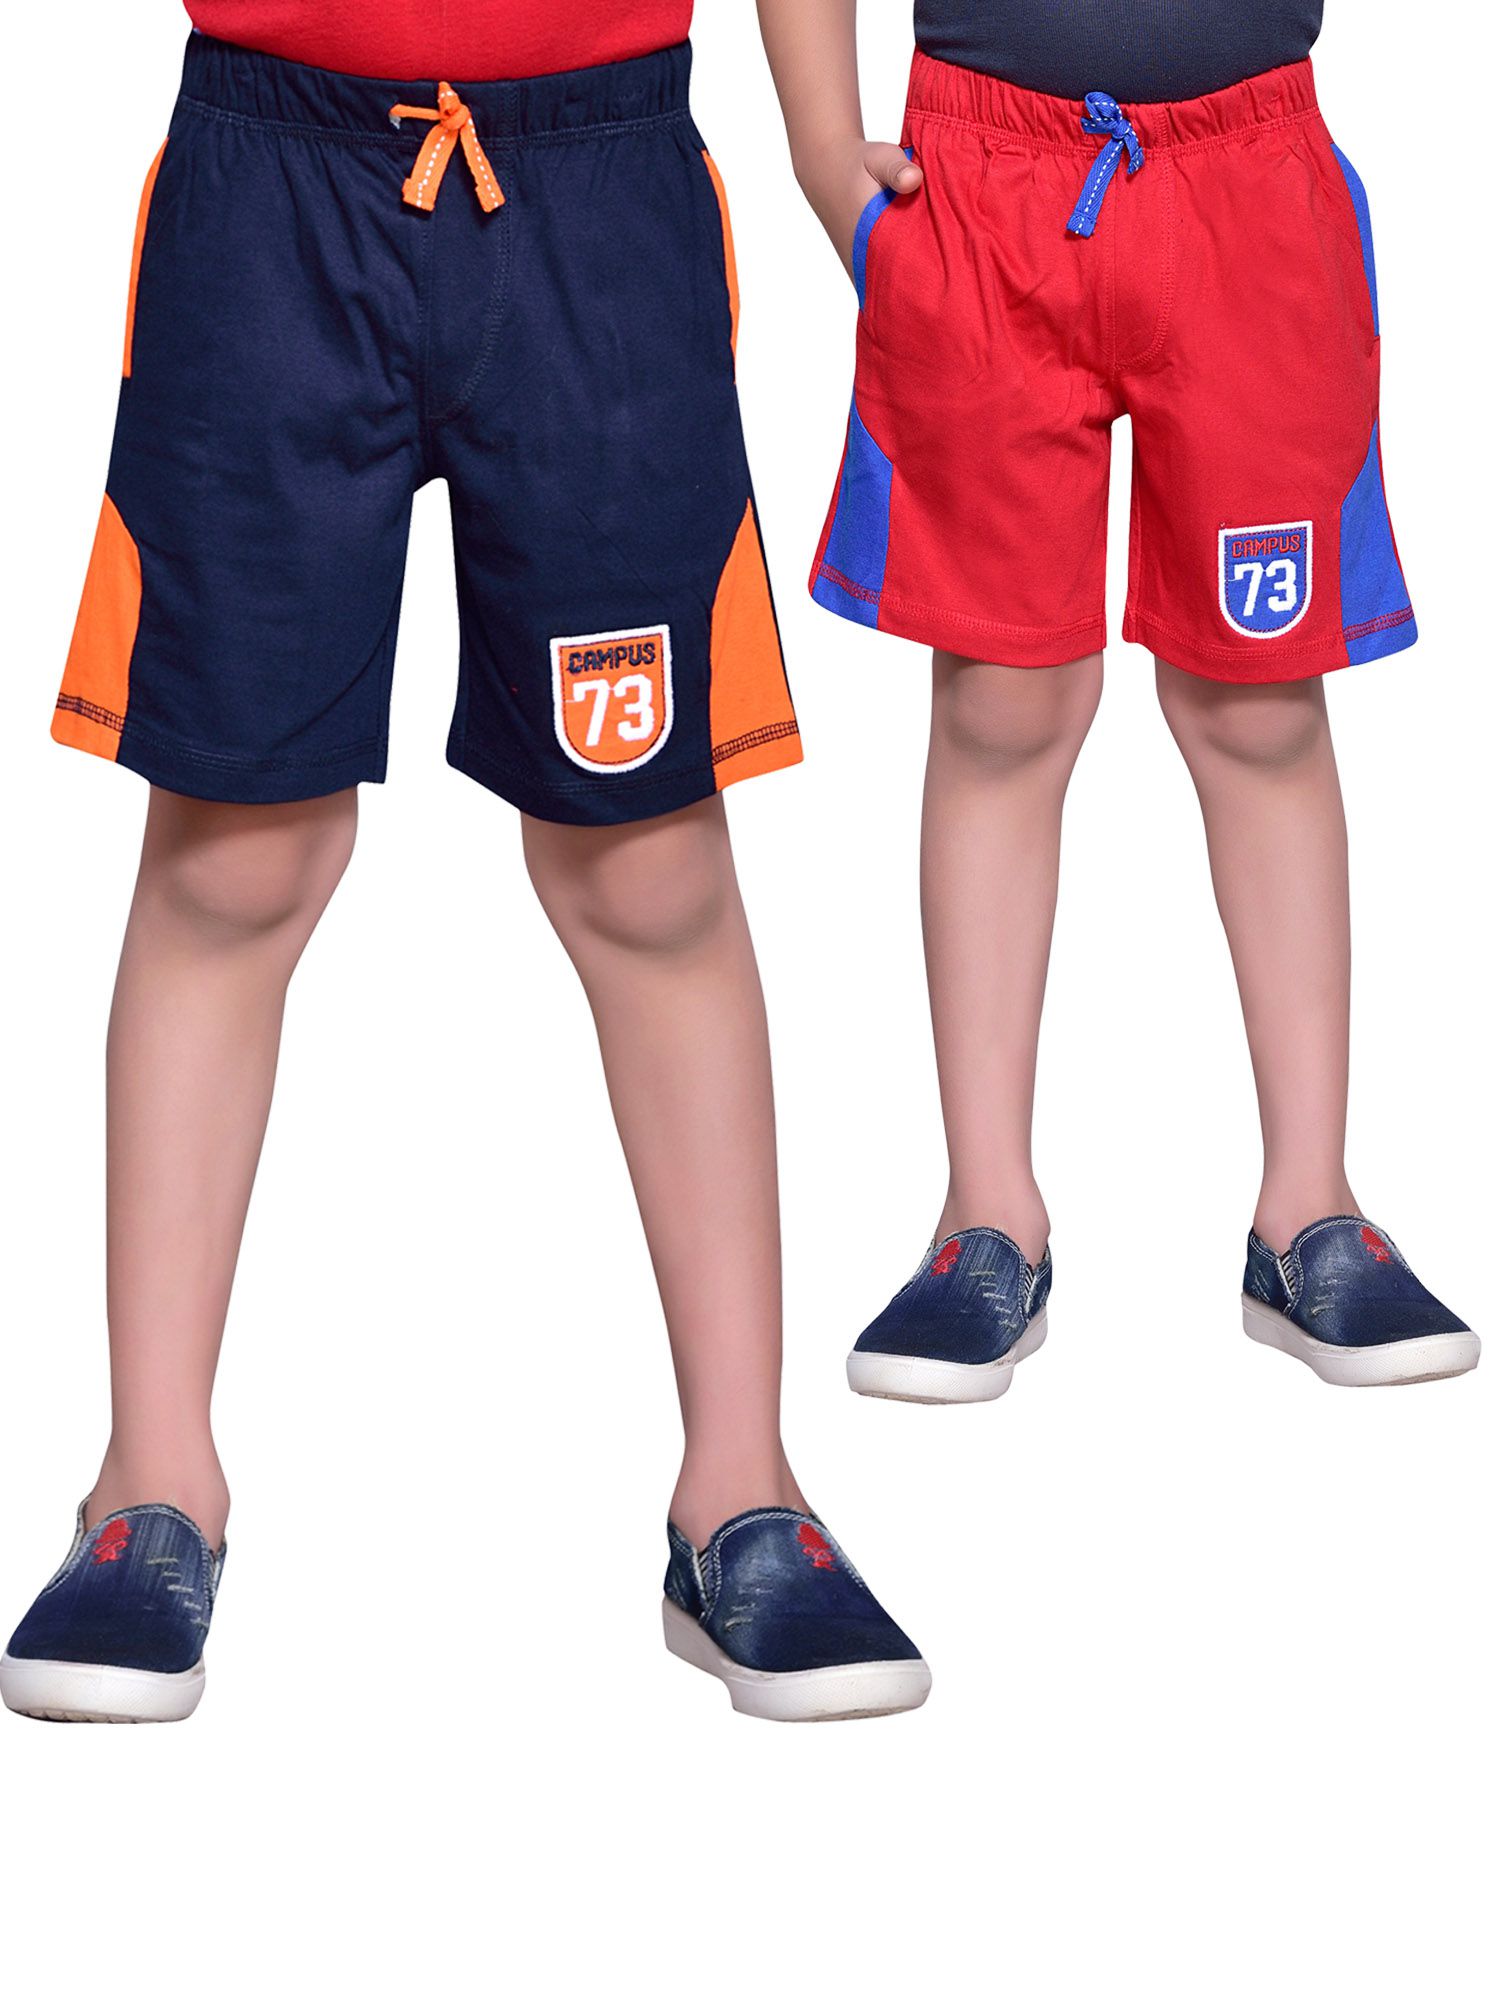 BOYS NAVY AND RED SHORTS - PACK OF 2 - Buy BOYS NAVY AND RED SHORTS ...